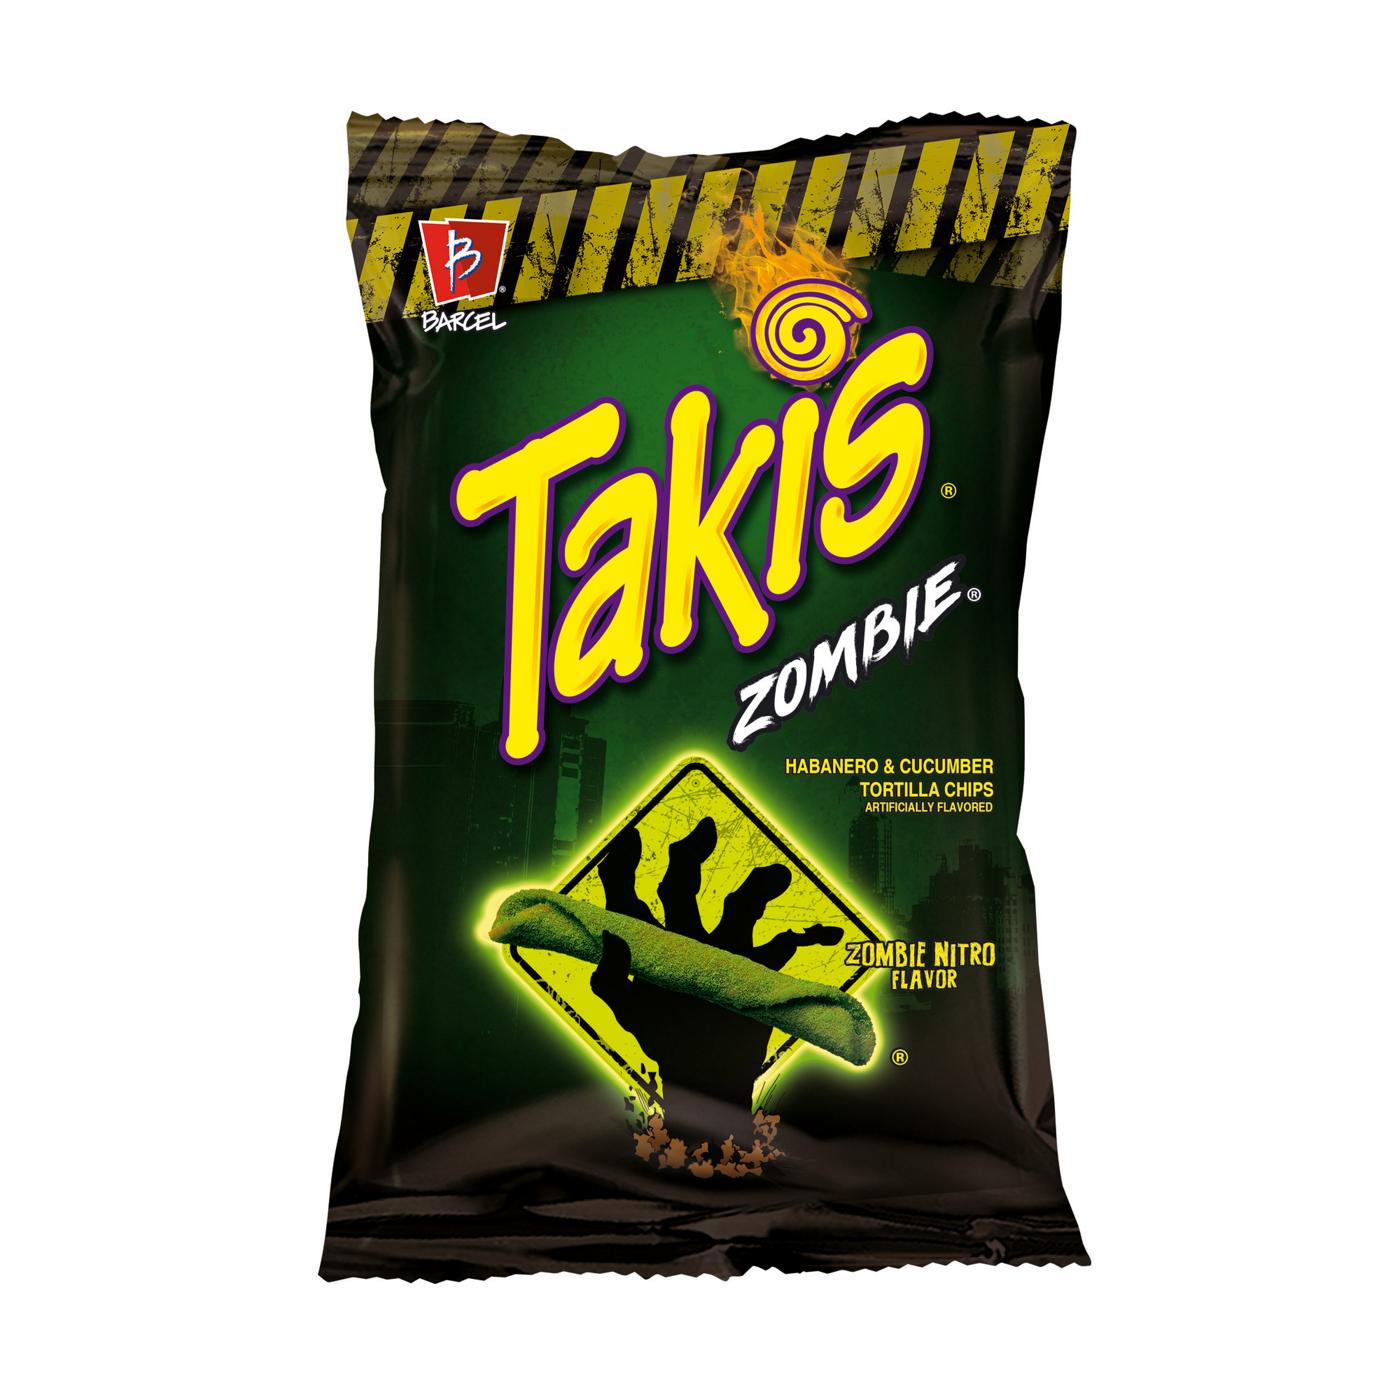 Takis Zombie Habanero & Cucumber Rolled Tortilla Chips; image 1 of 5